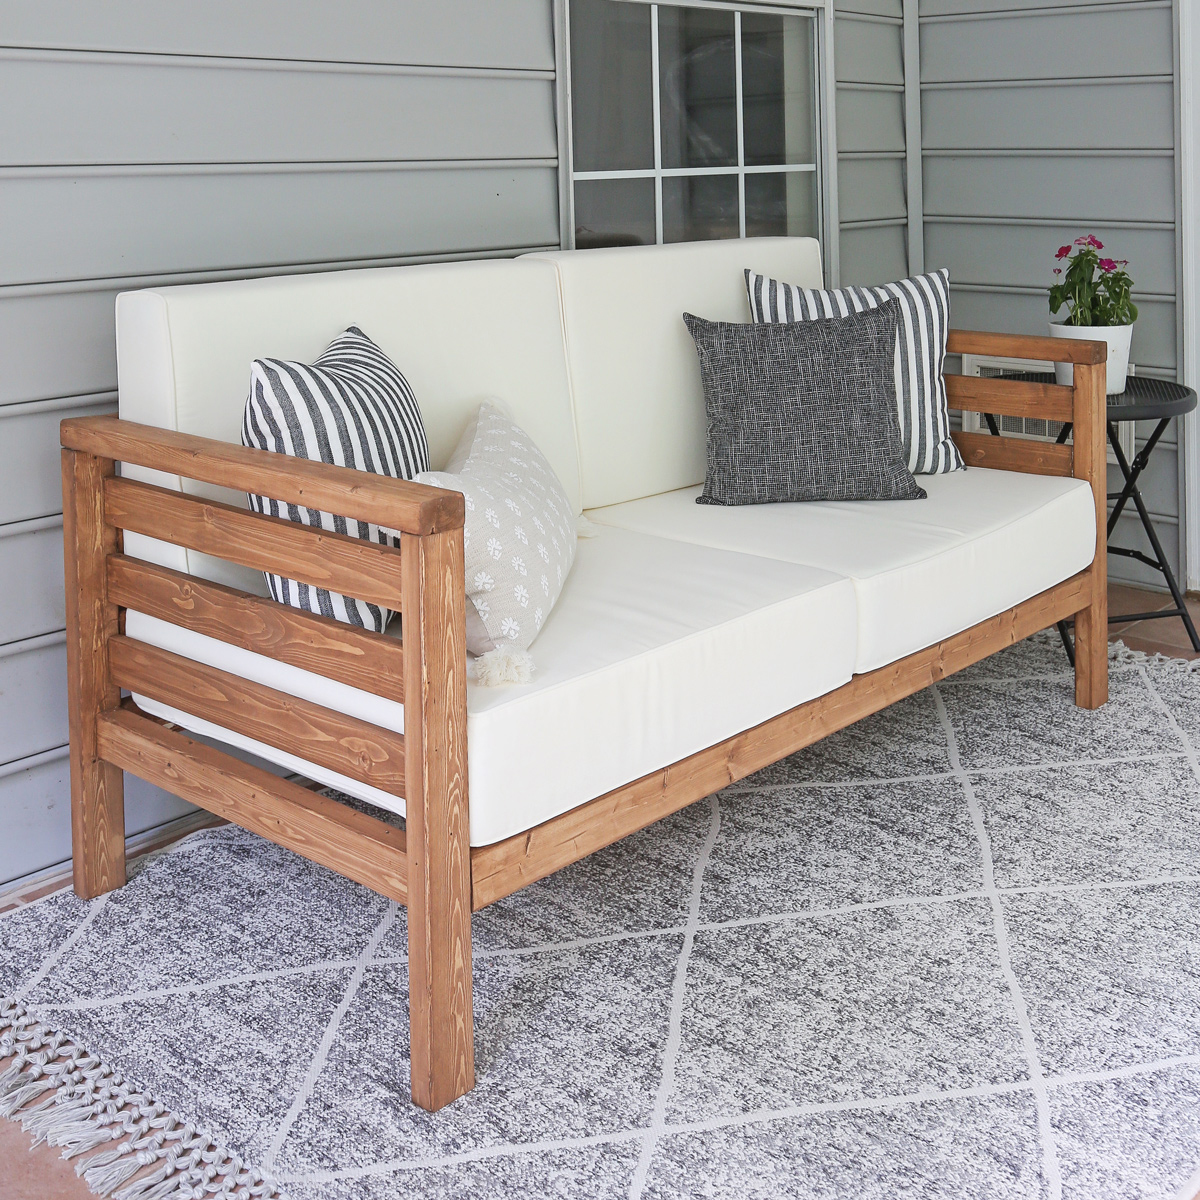 age Lee Portuguese DIY Outdoor Couch - Angela Marie Made